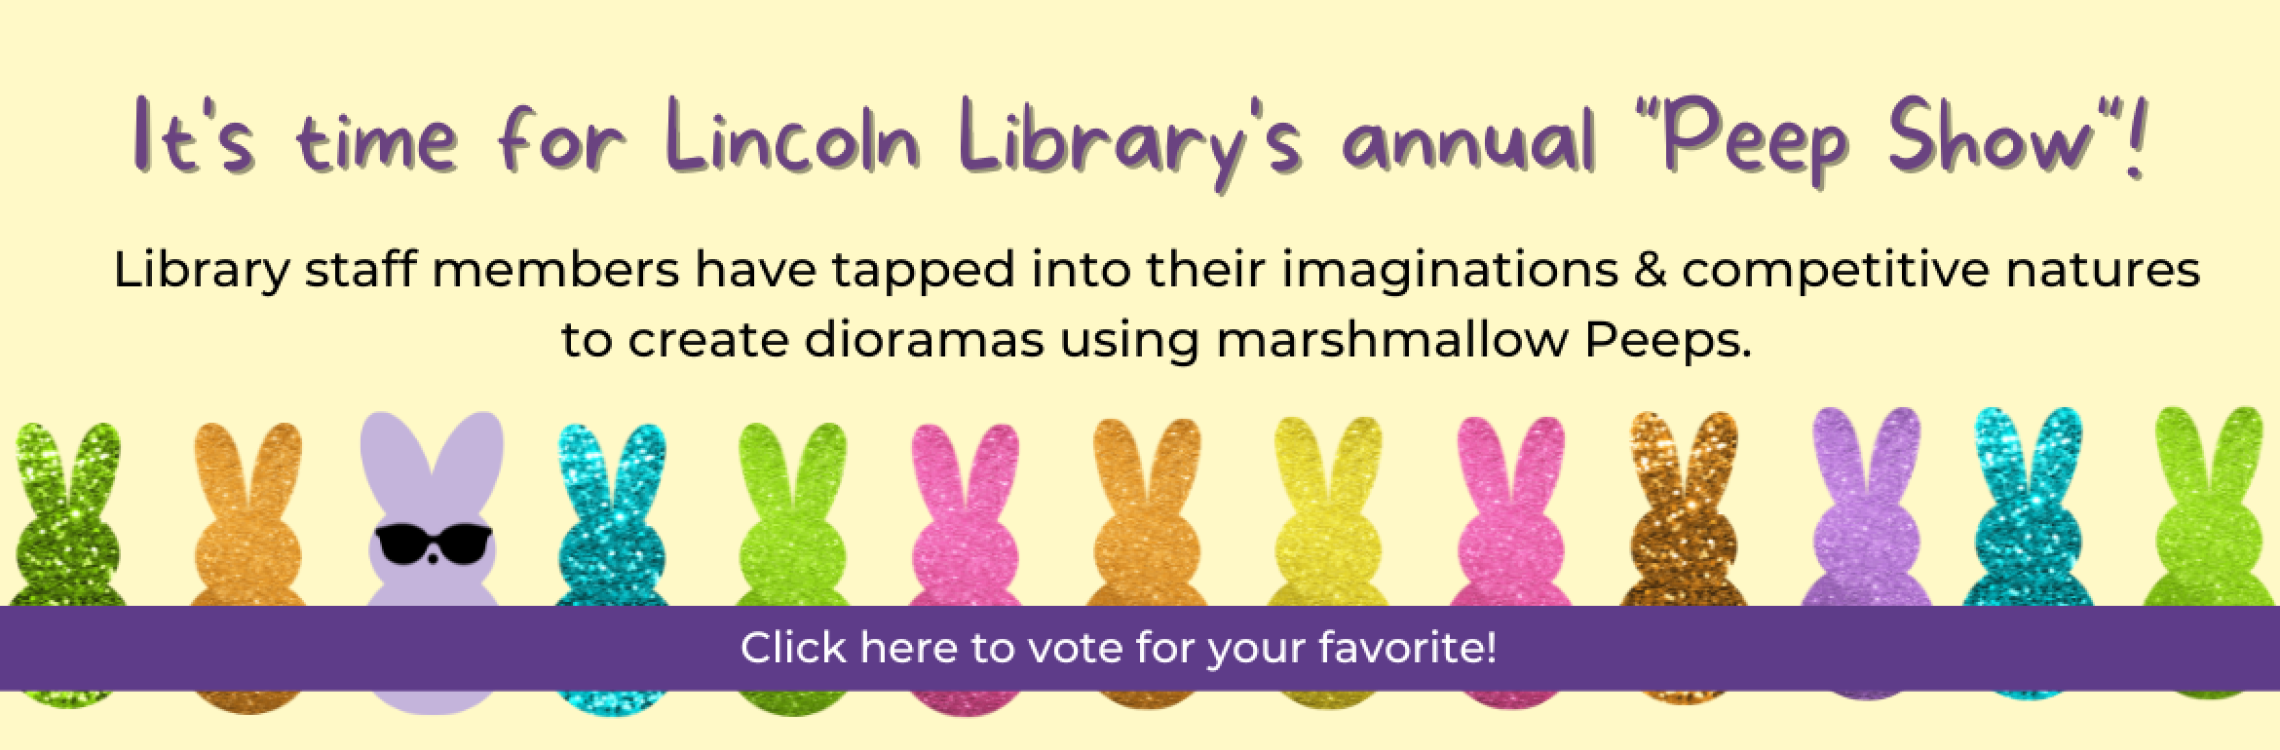 Click here to vote for your favorite Peep diorama!